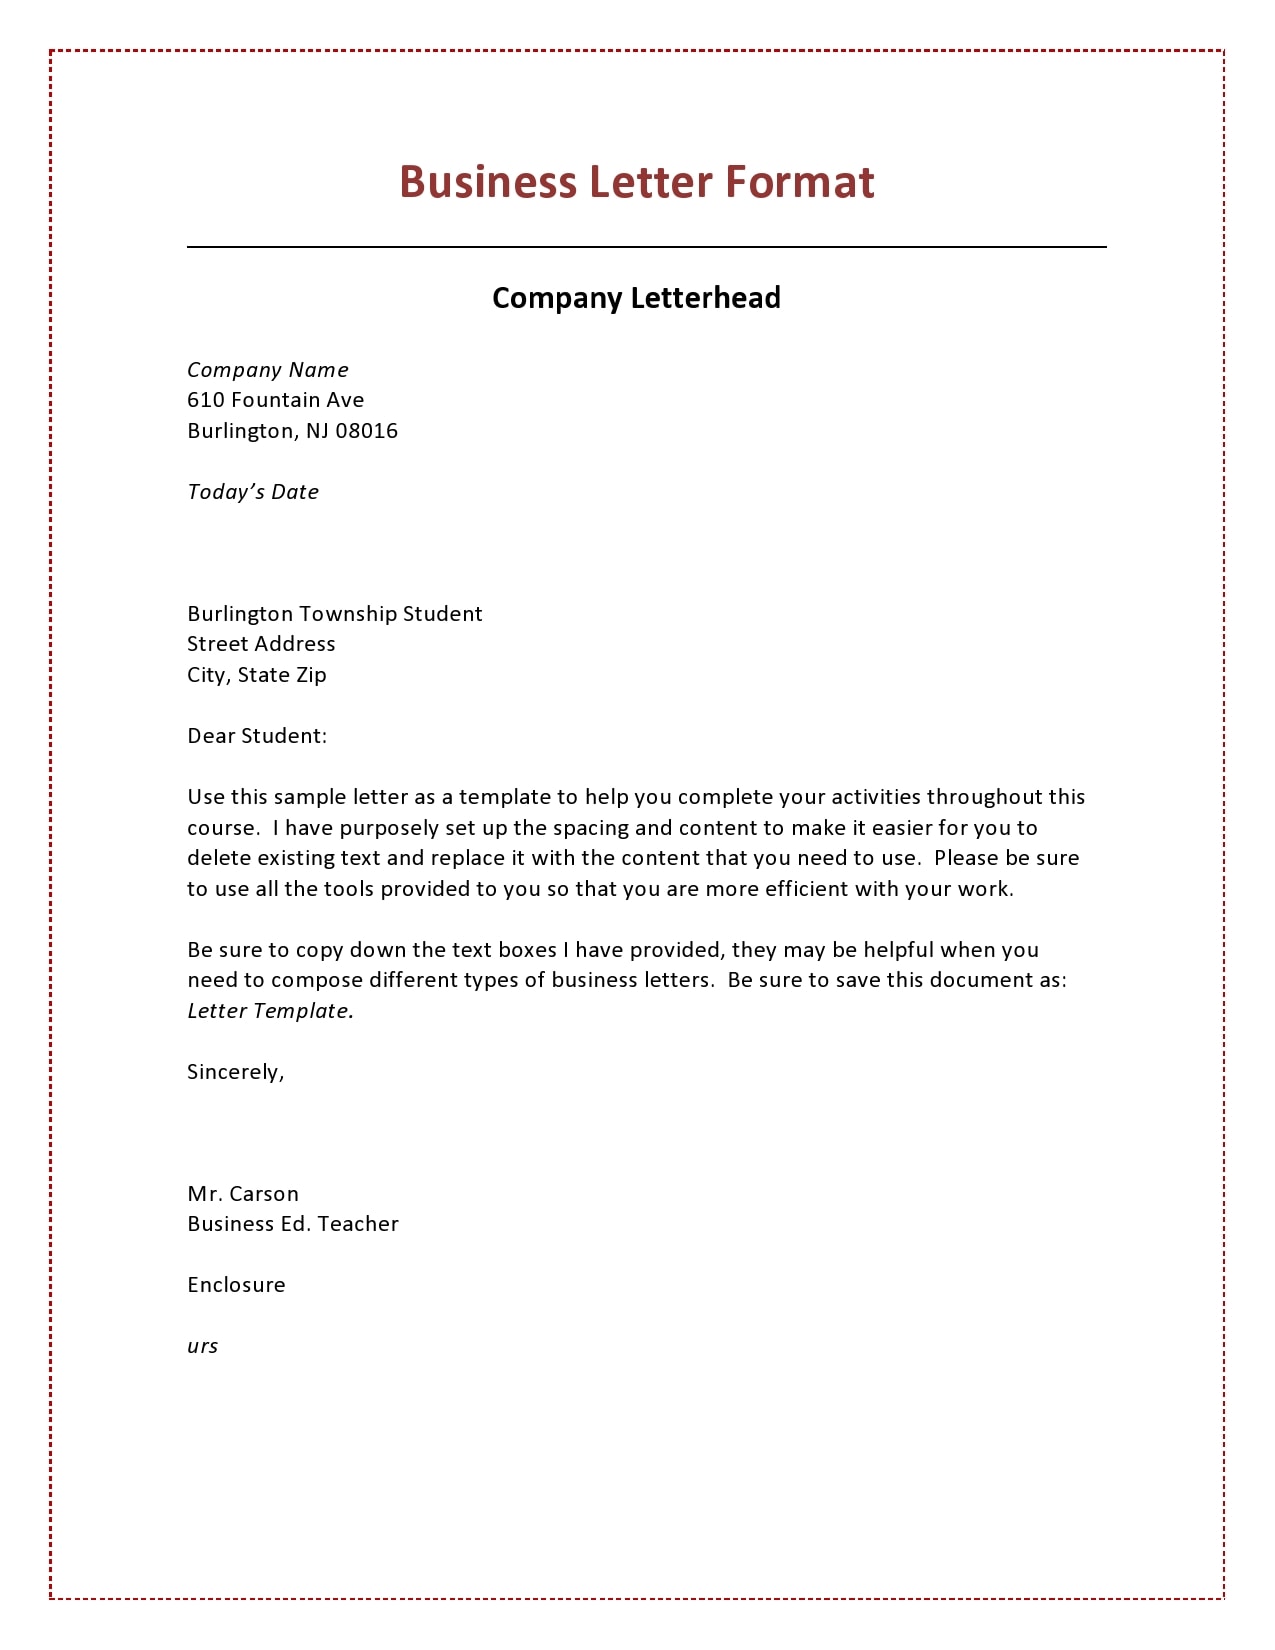 22 Professional Business Letter Templates [Word]